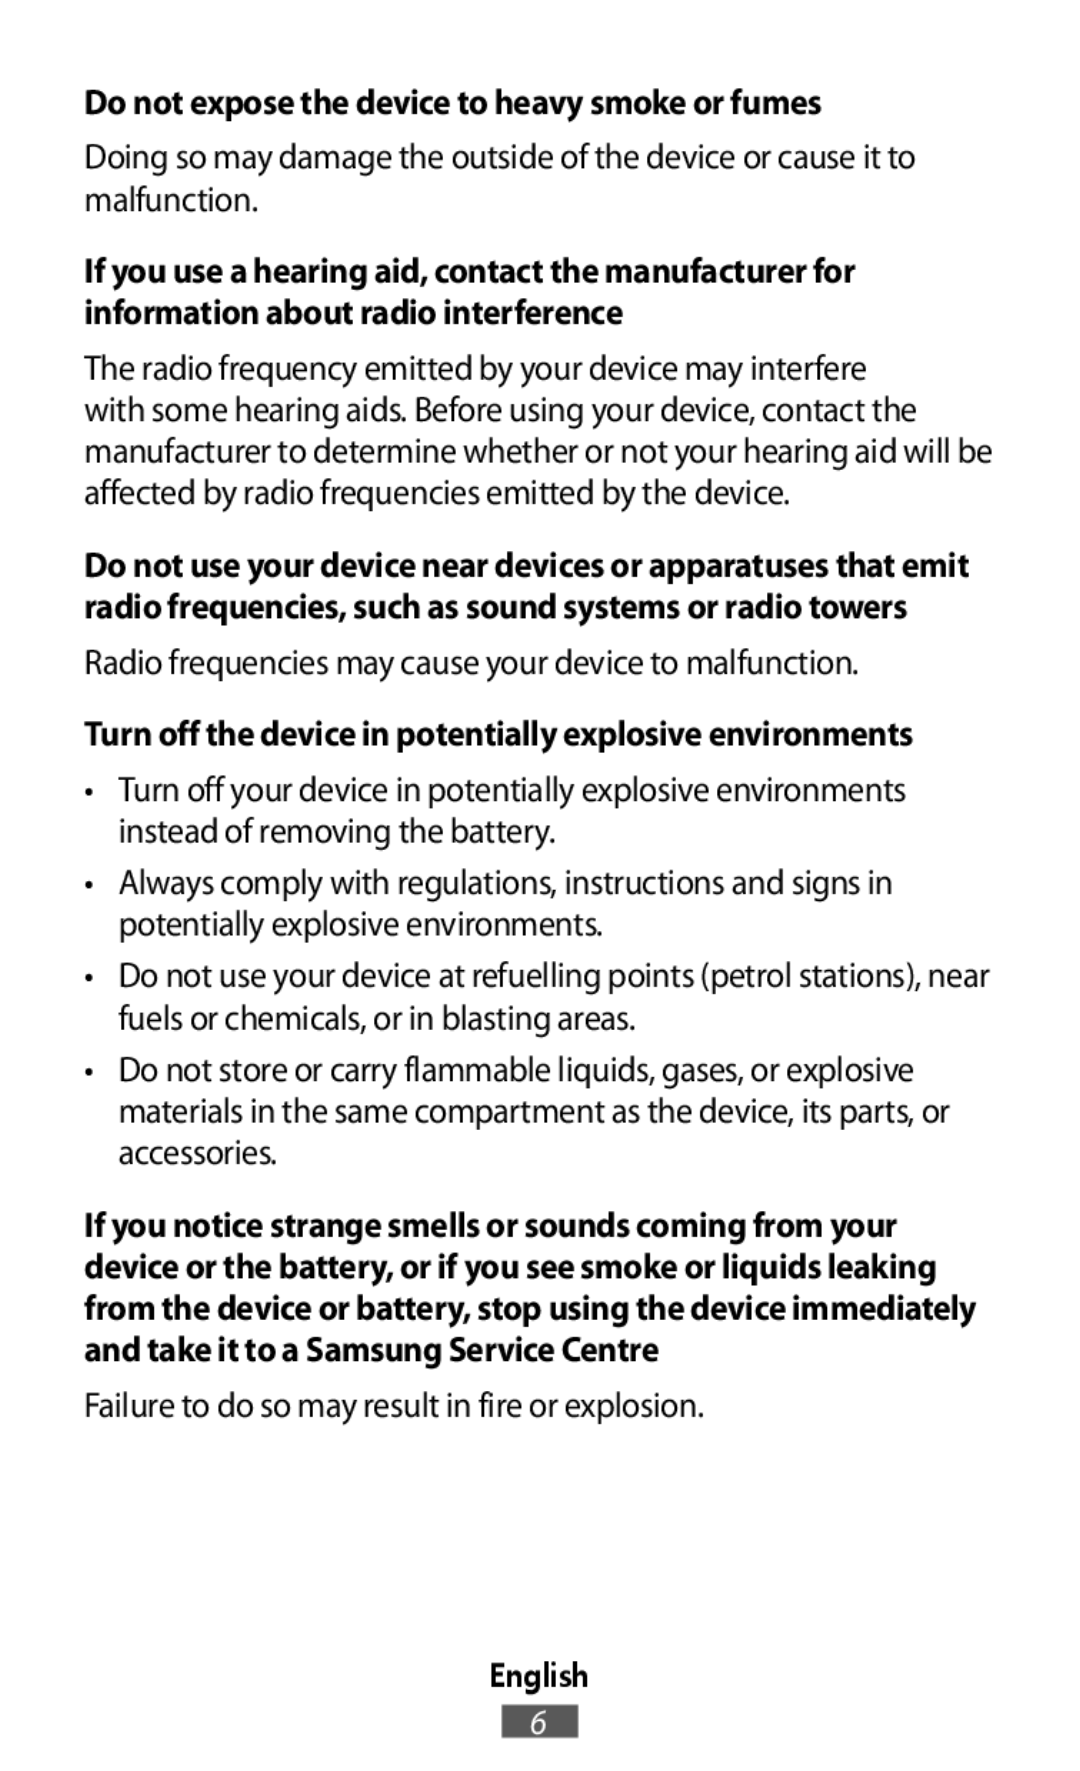 Radio frequencies may cause your device to malfunction On-Ear Headphones Level On Wireless Headphones